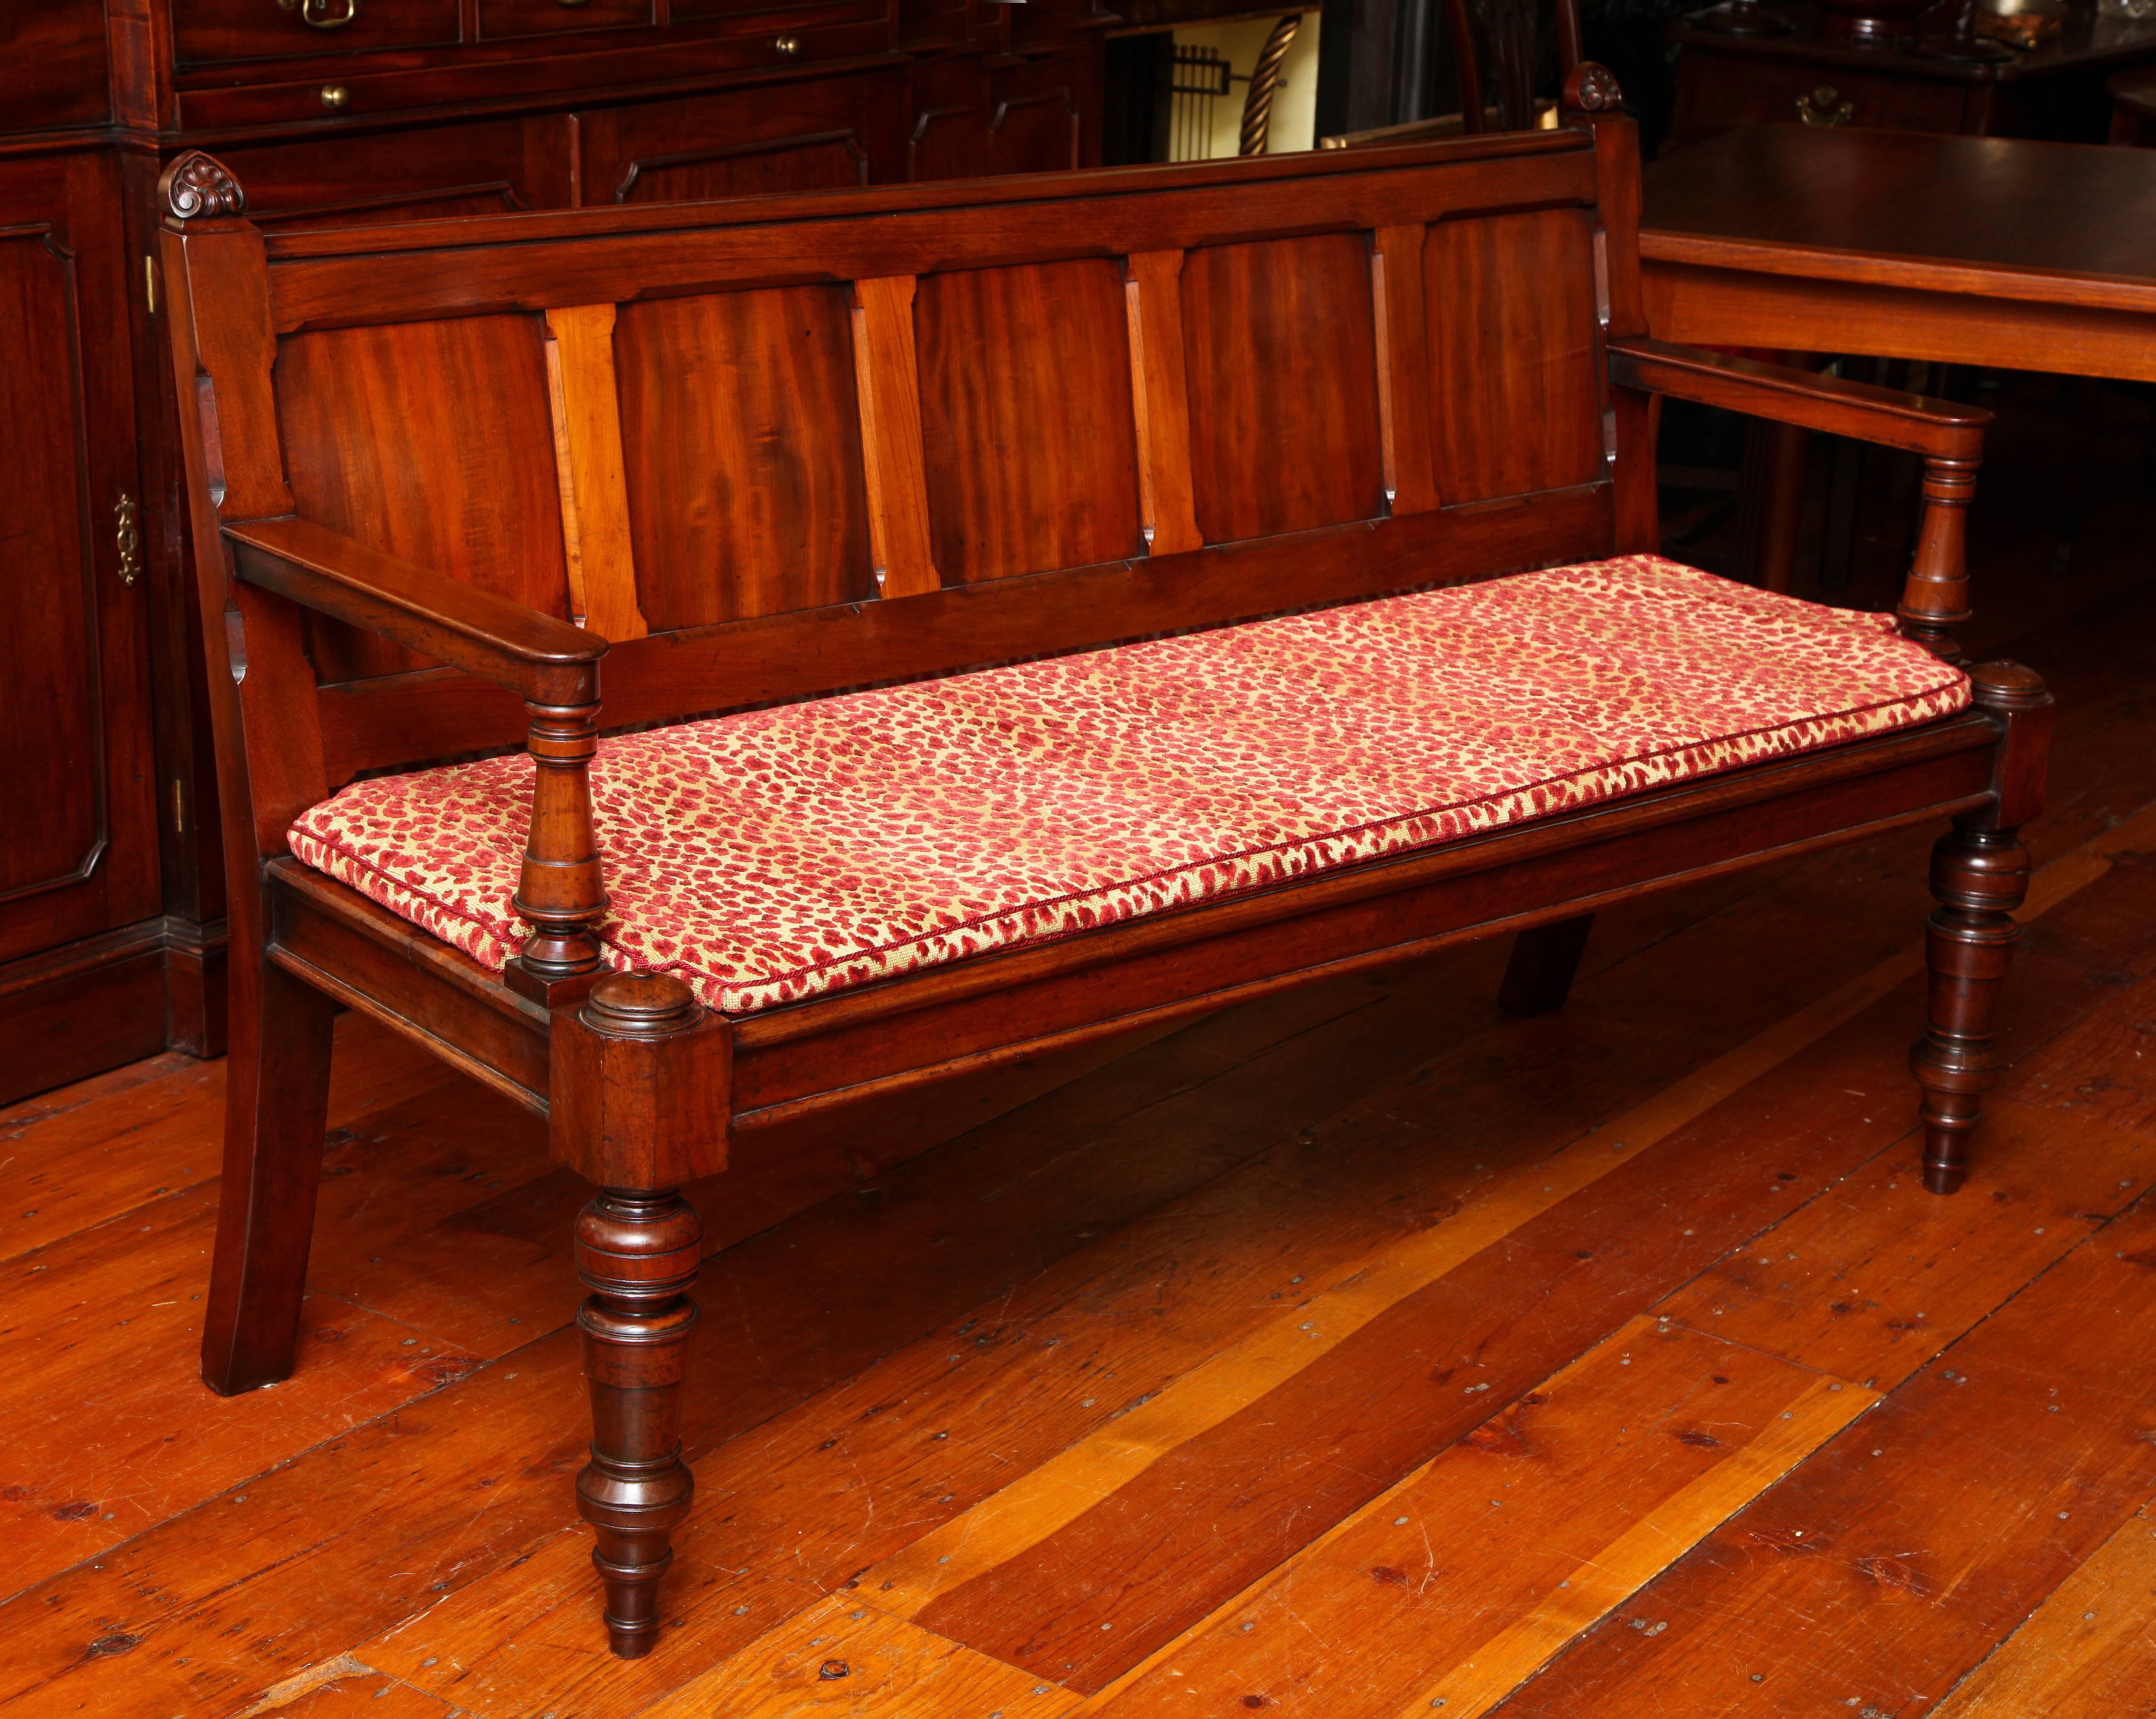 Fine William IV period solid mahogany five panelled back settee, the back having five figured shaped rectangular mahogany panels with anthemion carved posts and plank arms with turned posts, on heavily turned tapering front legs, English, circa